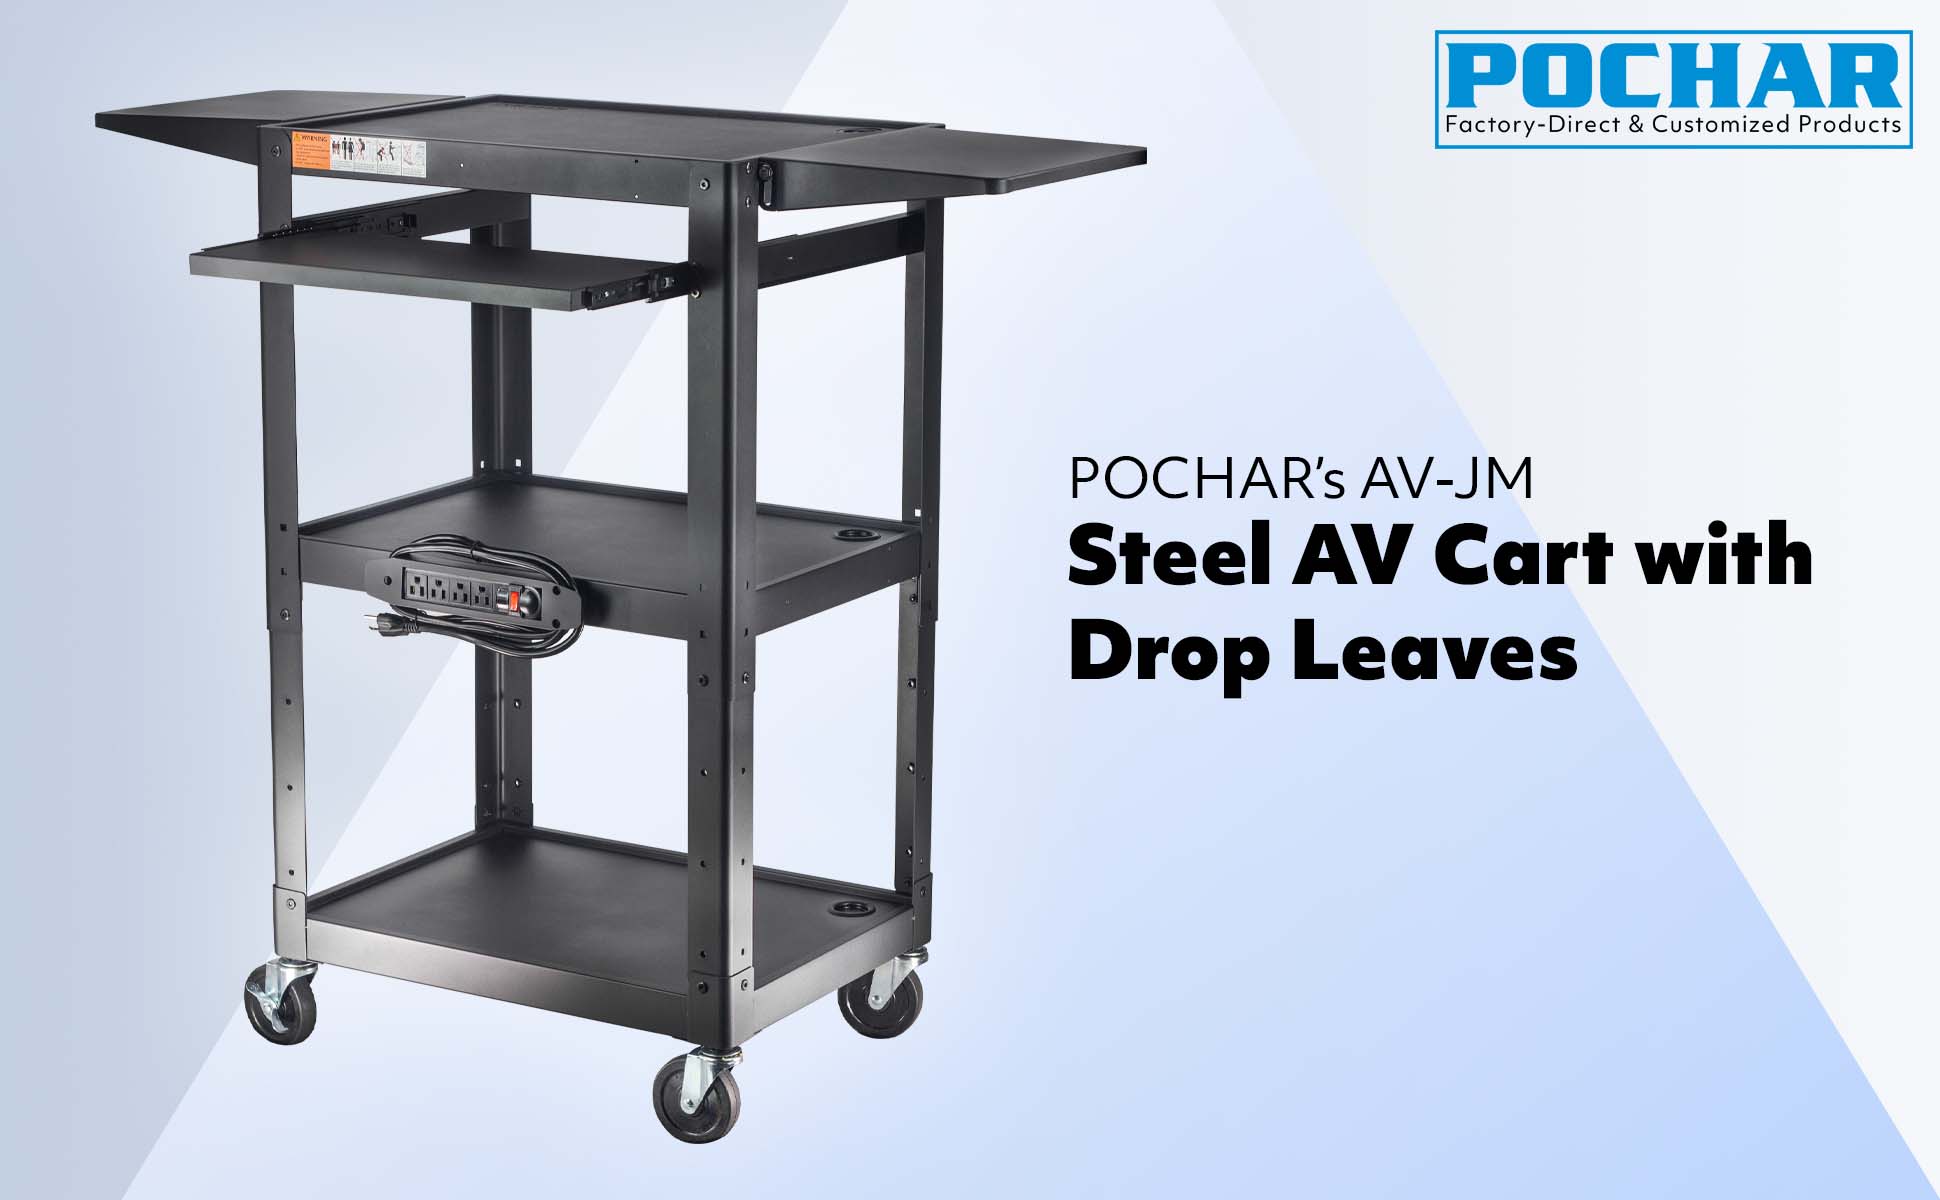 POCHAR-AVJM-Steel-Audio-Visual-Cart-with-Drop-Leaves-and-Keyboard Tray-Metal-Projector-Cart-Steel-Utility-Cart